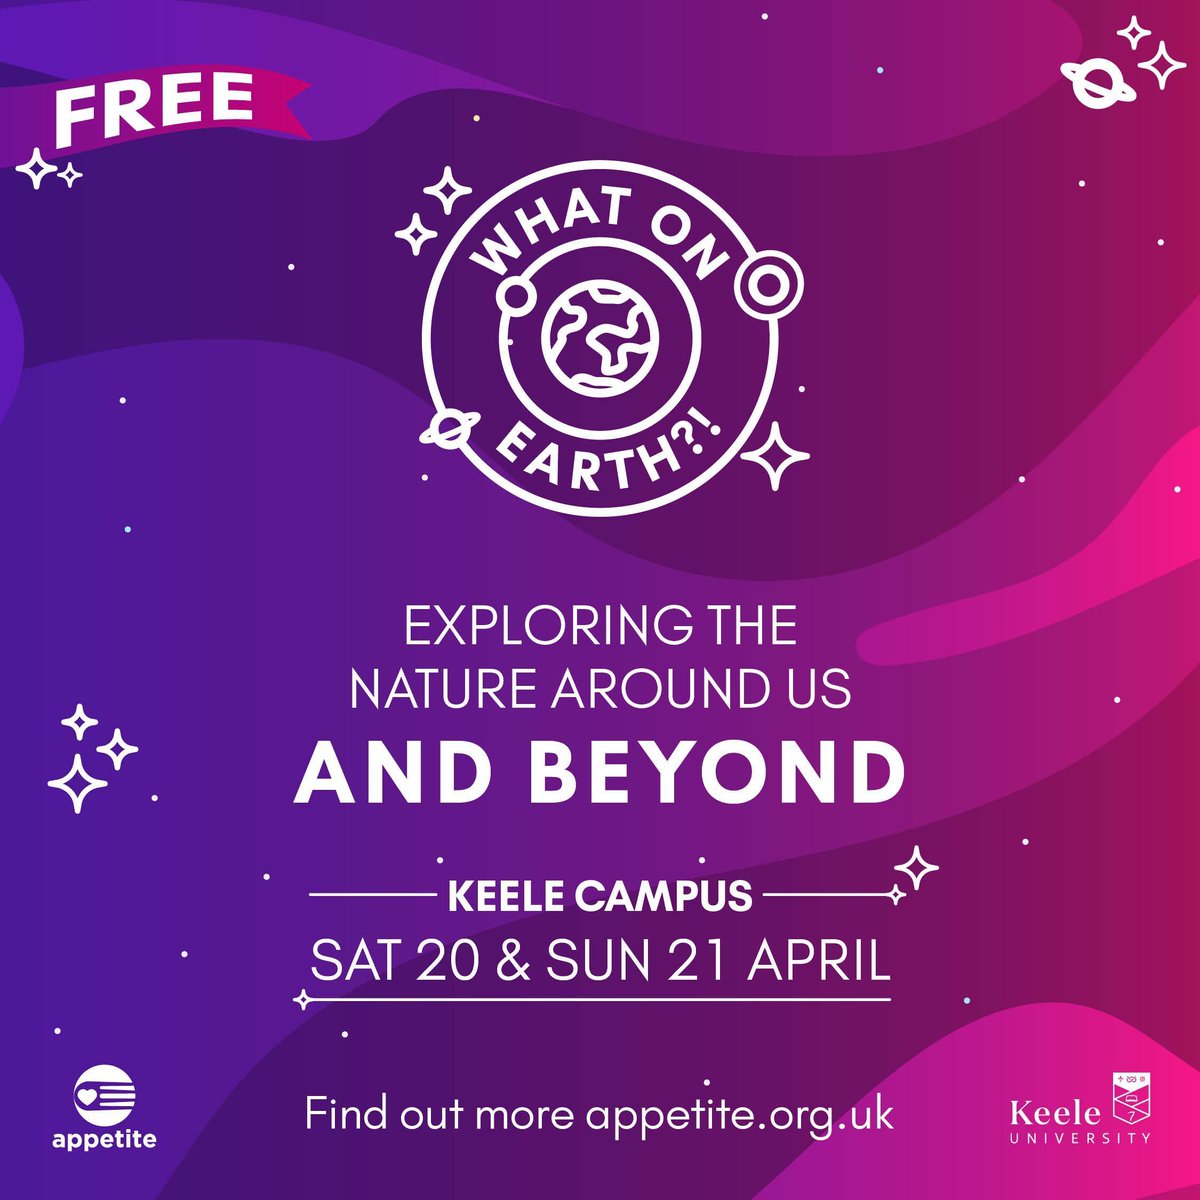 Earth Day celebration on campus this weekend! 🌍✨ FREE event open to all. 📍 Keele Observatory 📆 April 20 & 21, 11am -4pm In partnership with @ArtsKeele and @appetitestoke, dive into a family fun weekend filled with hands-on activities. More info: buff.ly/3Jc8Kze